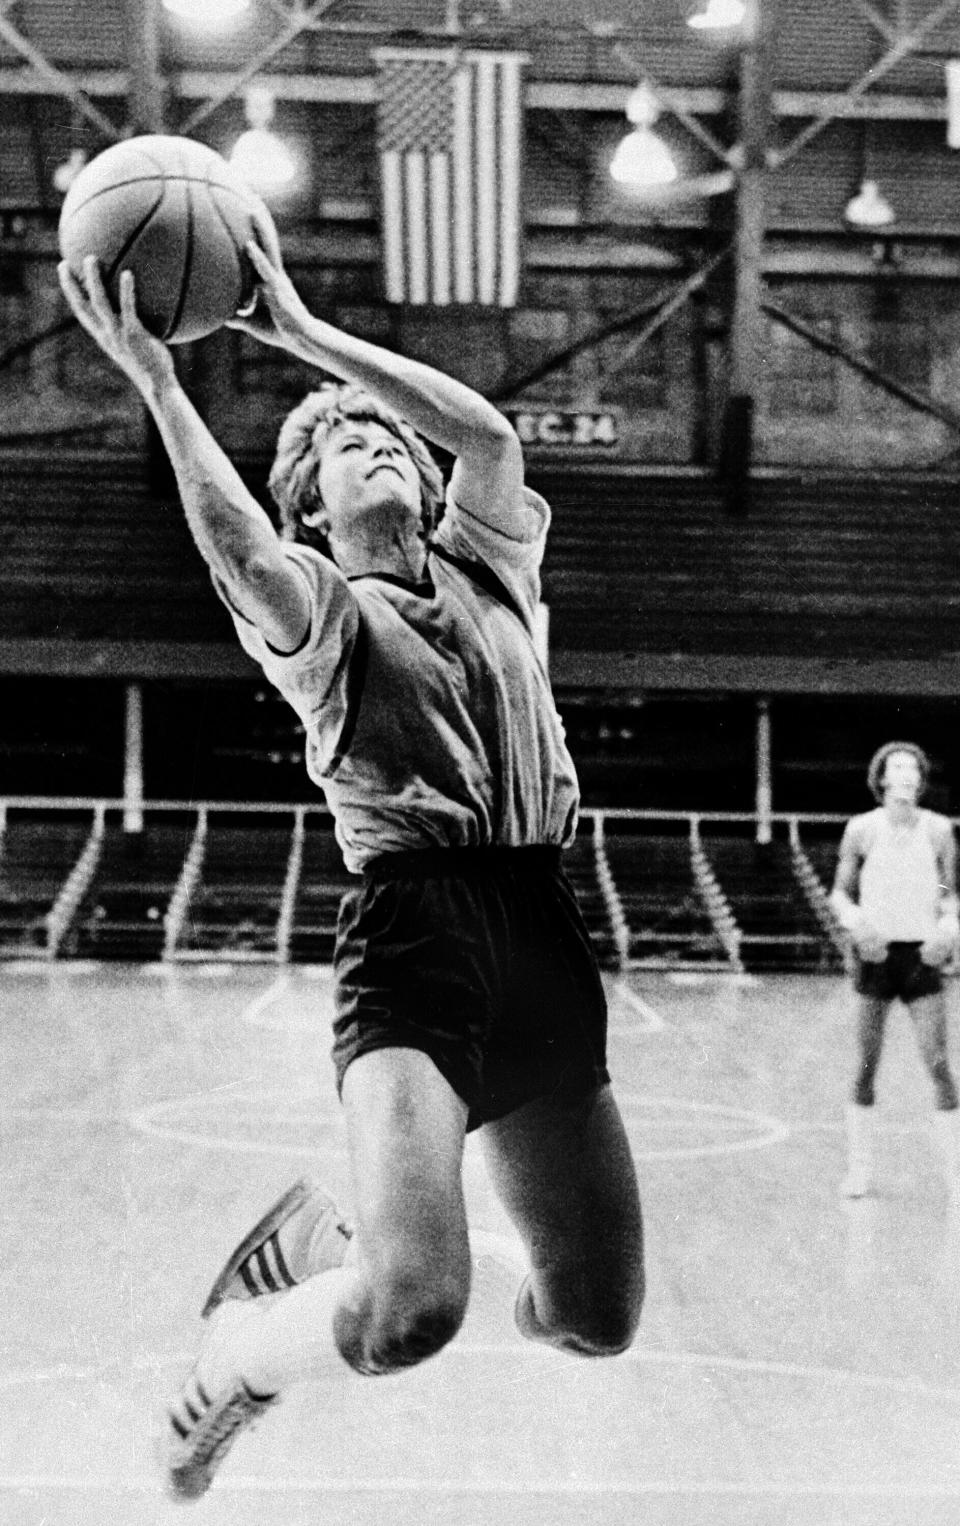 FILE - Ann Meyers drives during practice at the NBA rookie camp for the Indiana Pacers in Indianapolis, Sept. 10, 1978. Greats like Ann Meyers Drysdale laid the foundation for the heights the game has reached in 2024. (AP Photo/File)